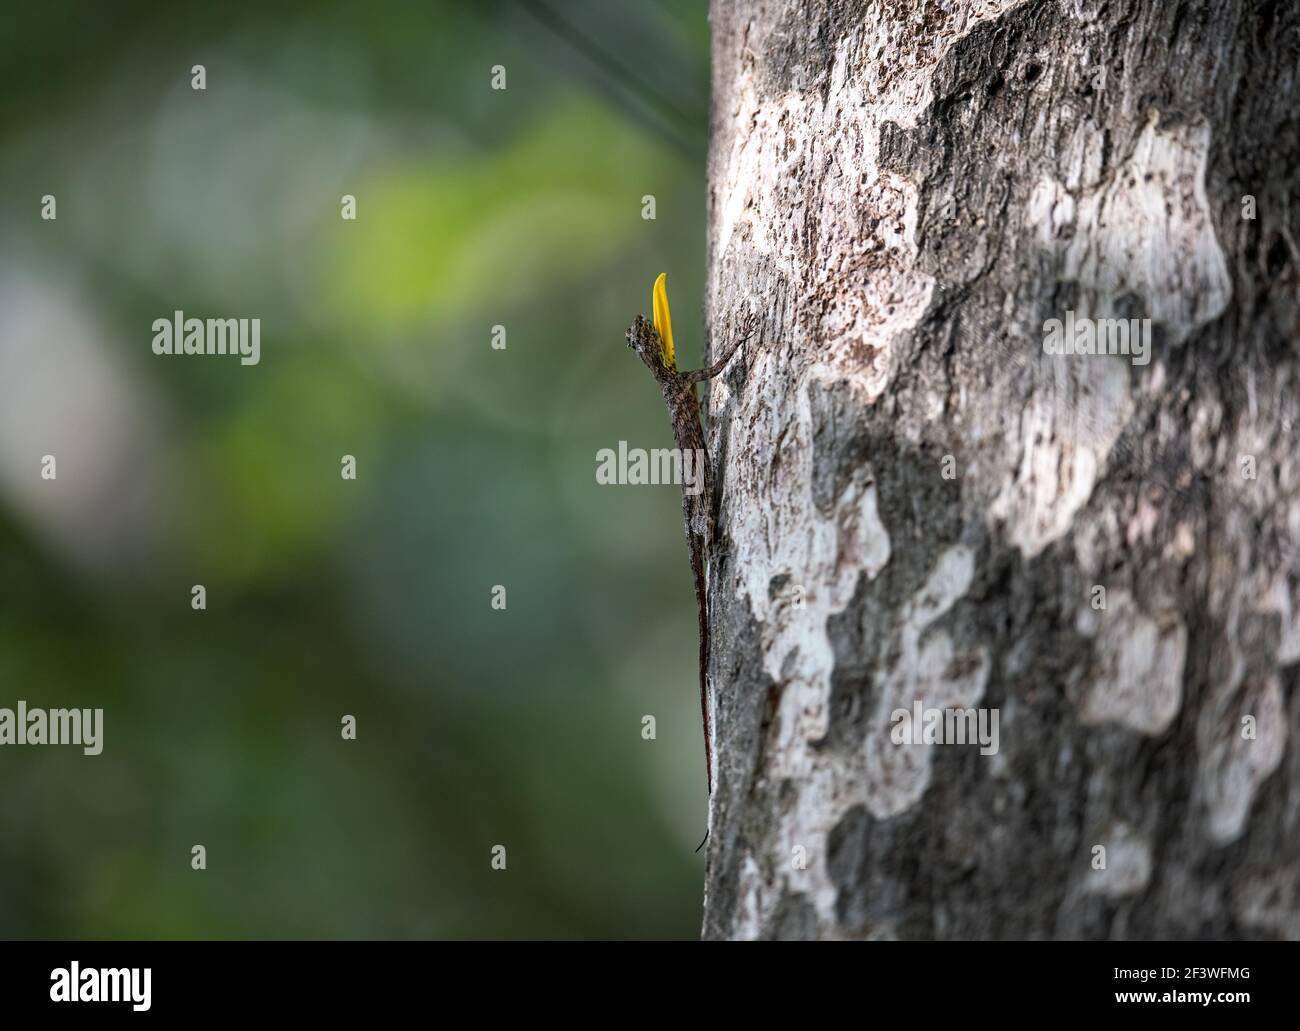 An intensified curious stare? Draco, Indian flying lizard, Western Ghats flying lizard, southern flying lizard Stock Photo